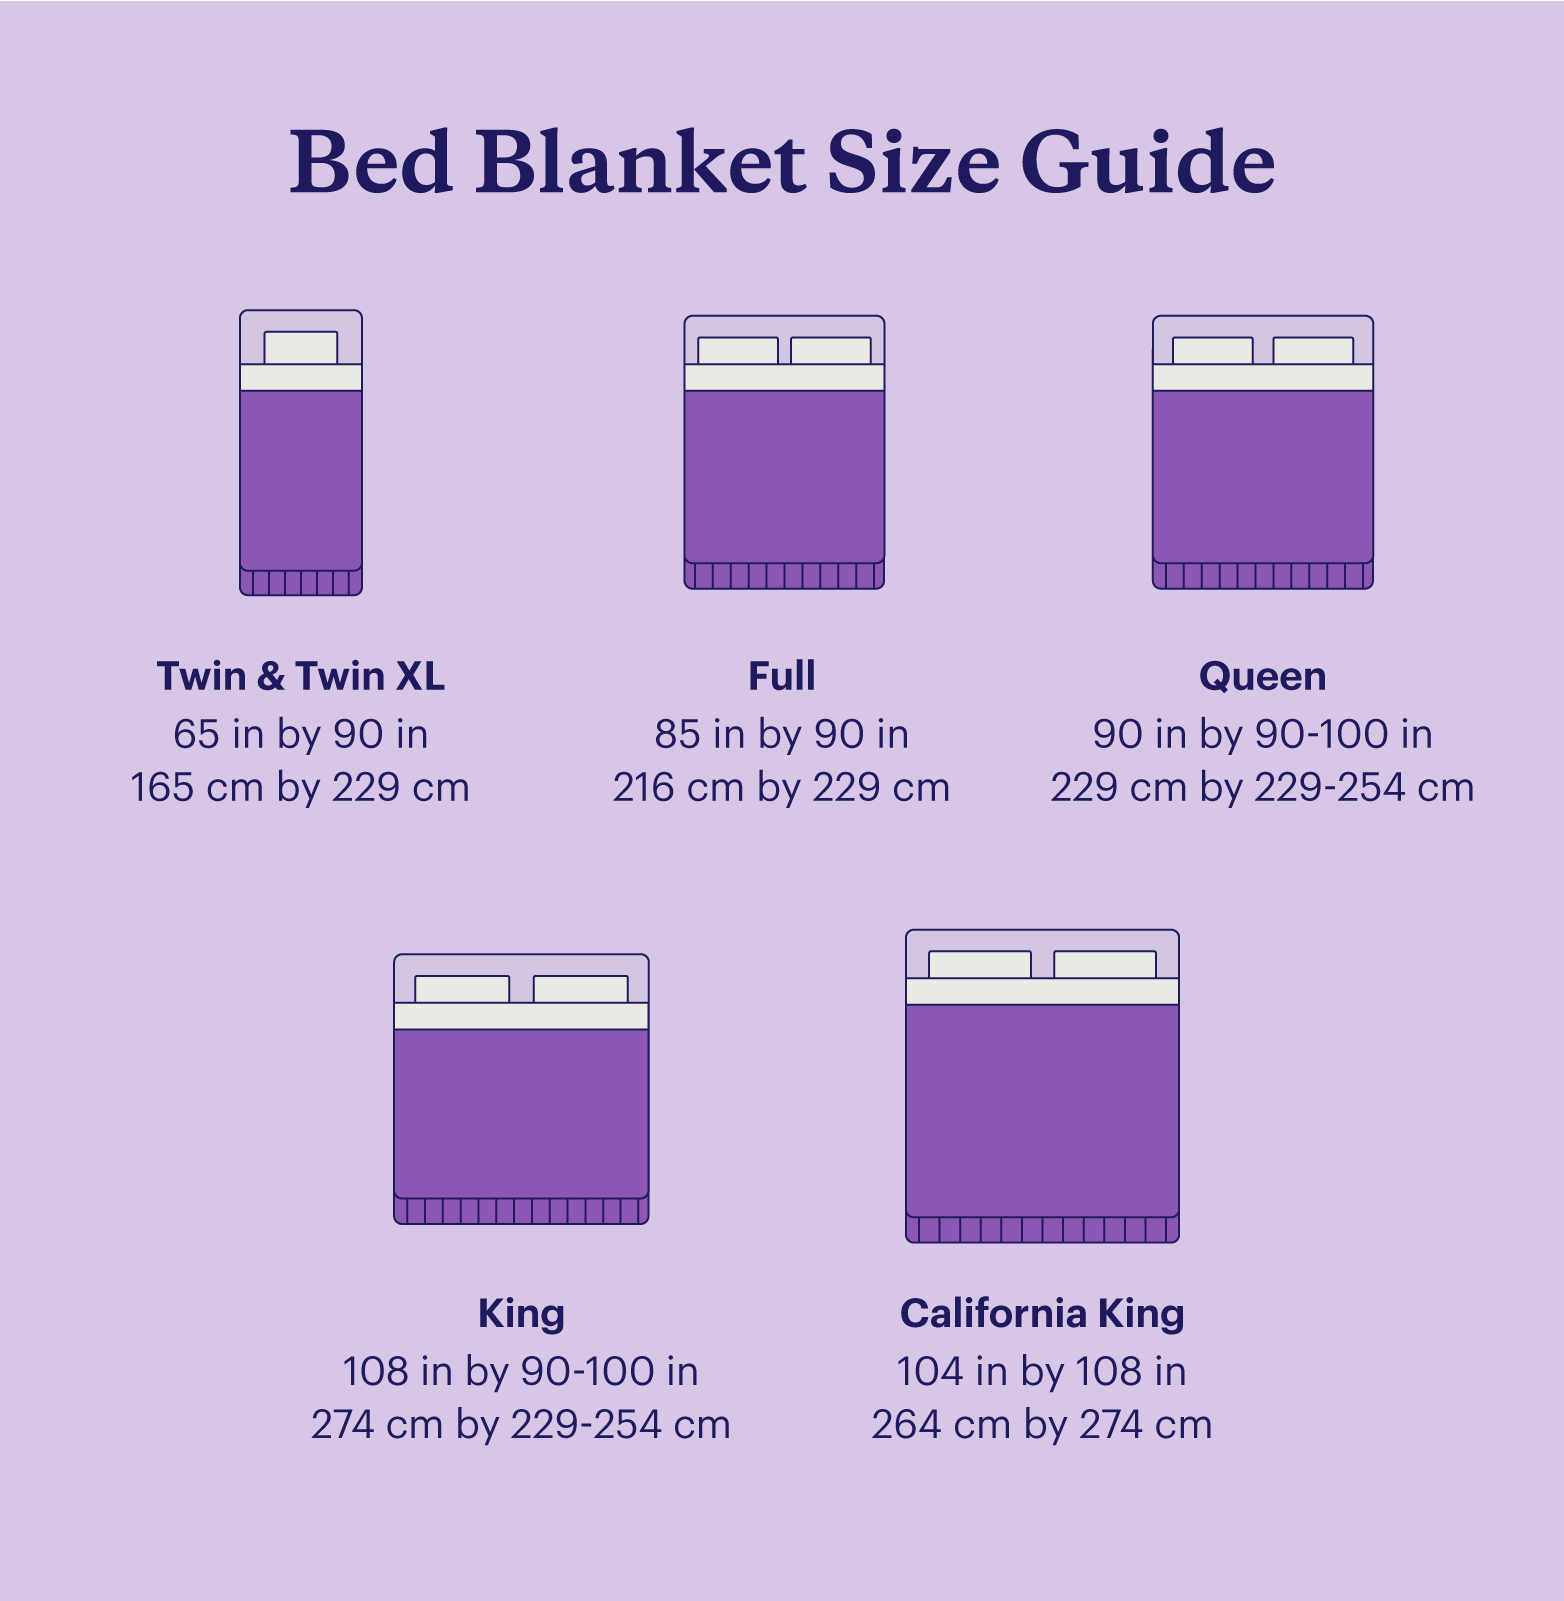 Blanket Sizes: Types and Dimensions Guide [CHART]